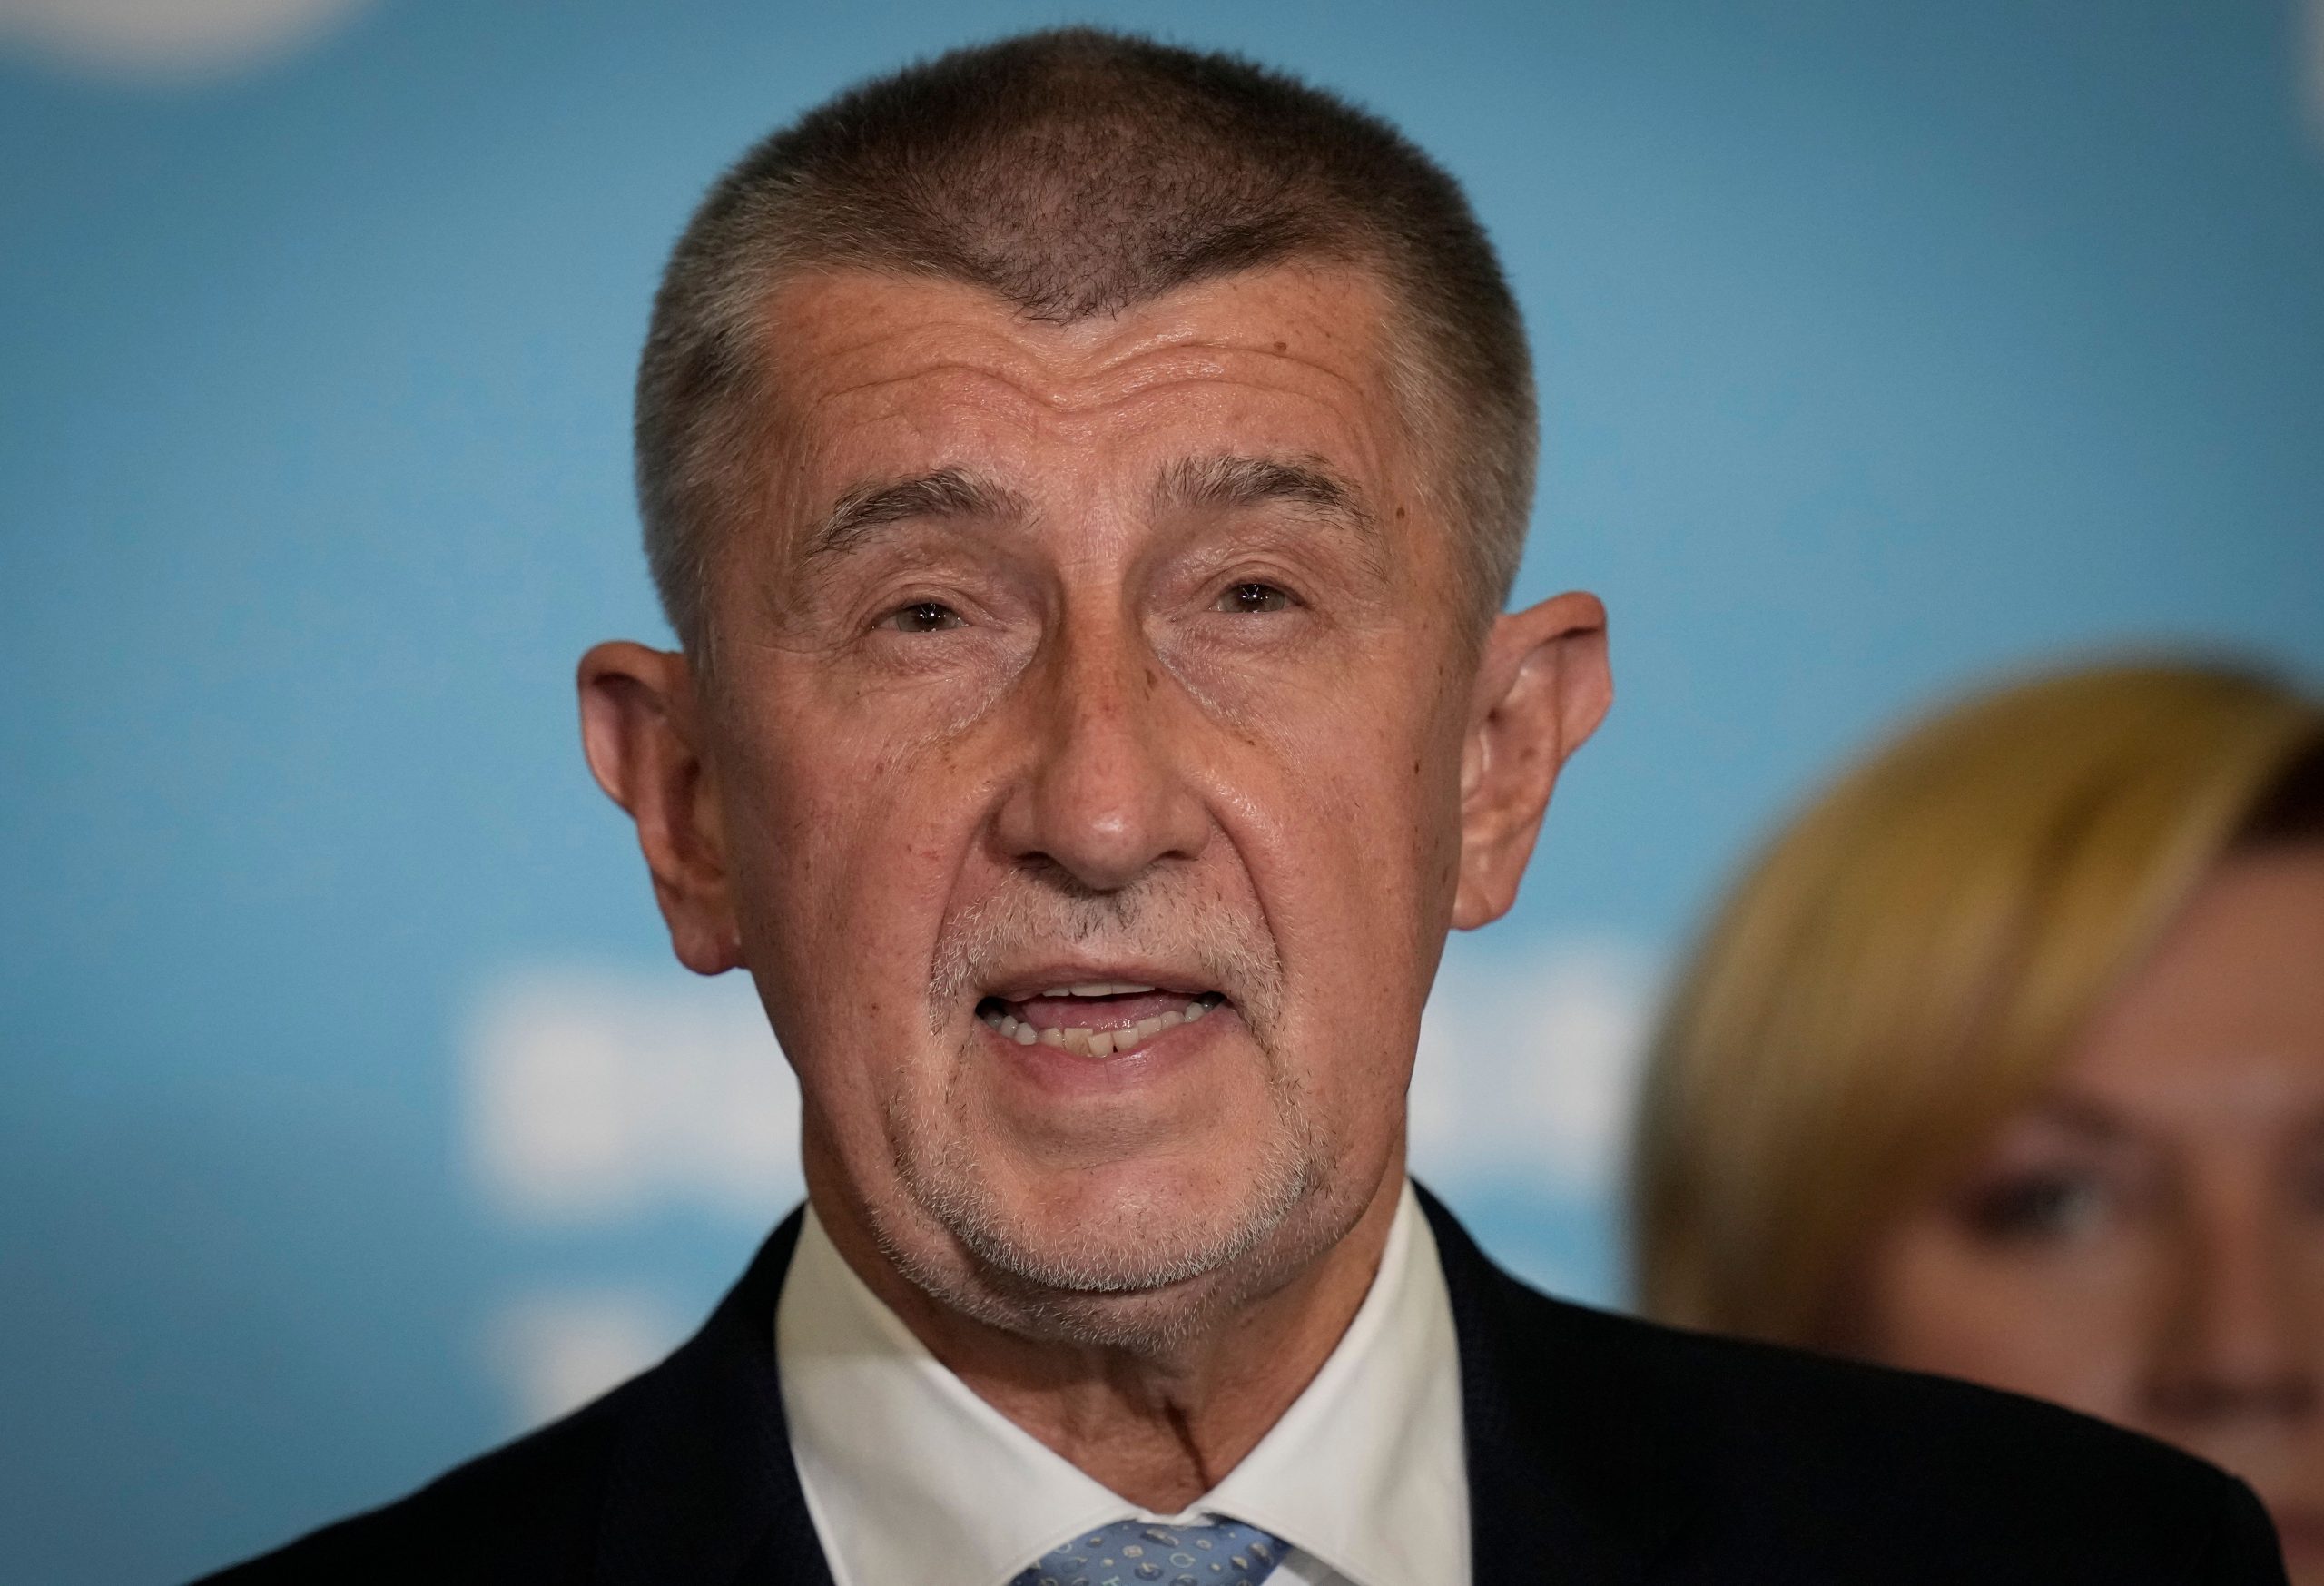 Czech Republic set for new leader as PM Andrej Babis’ ruling party narrowly loses